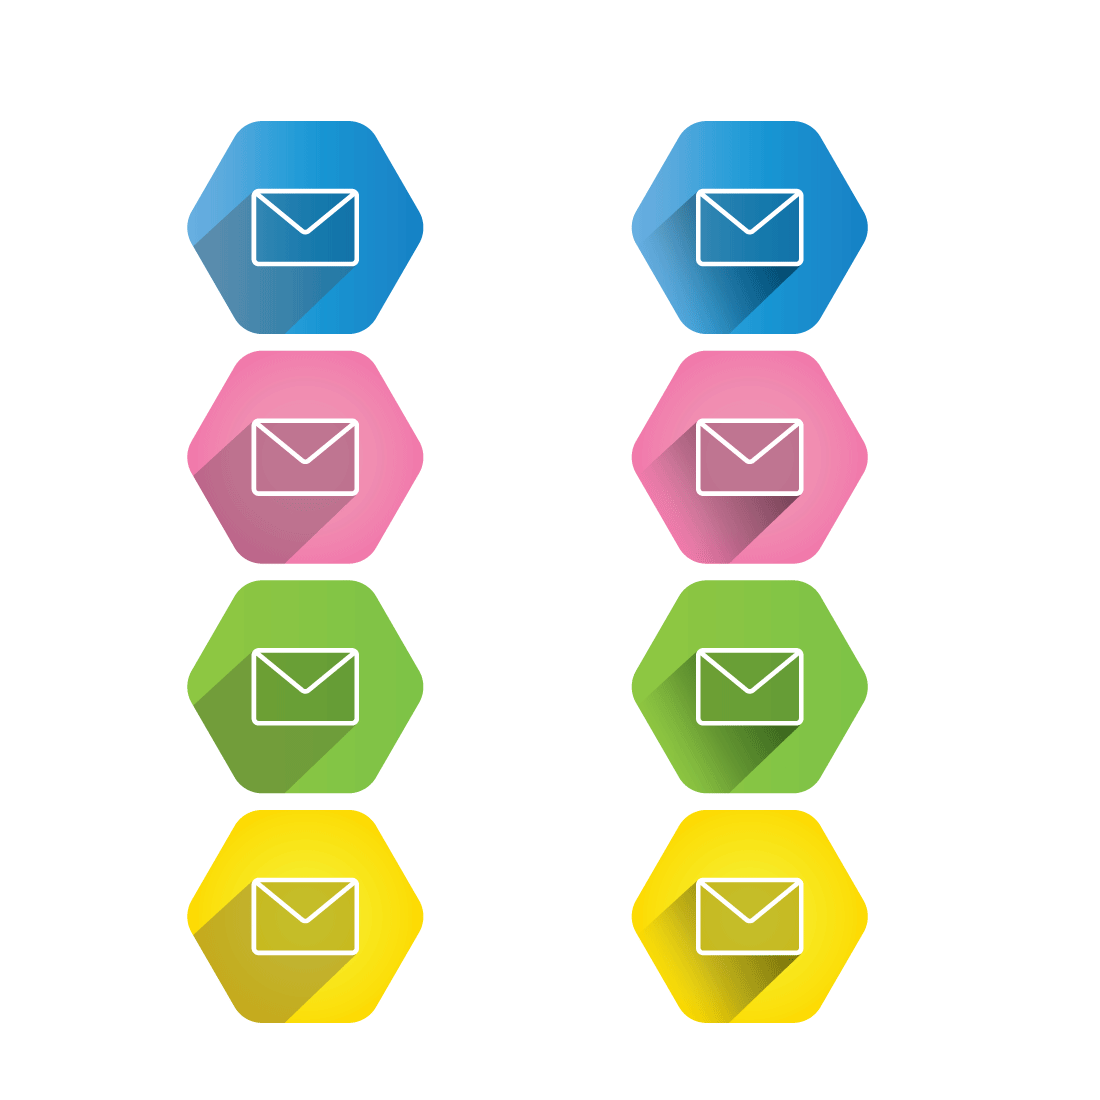 Colorful hexagon SVG contact icons 1 preview image.